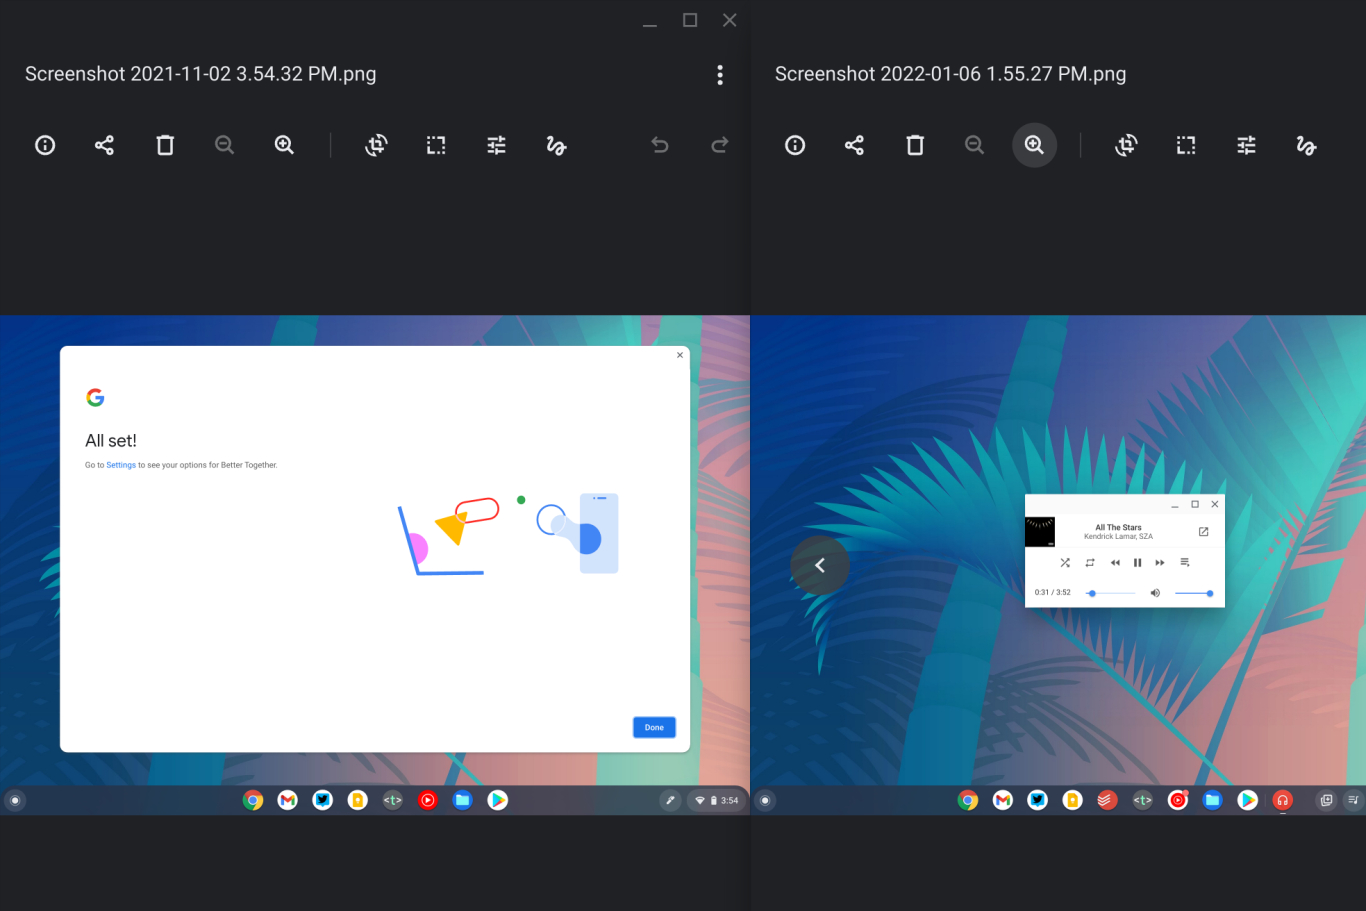 Google releases Chrome OS 97 with new audio player and more